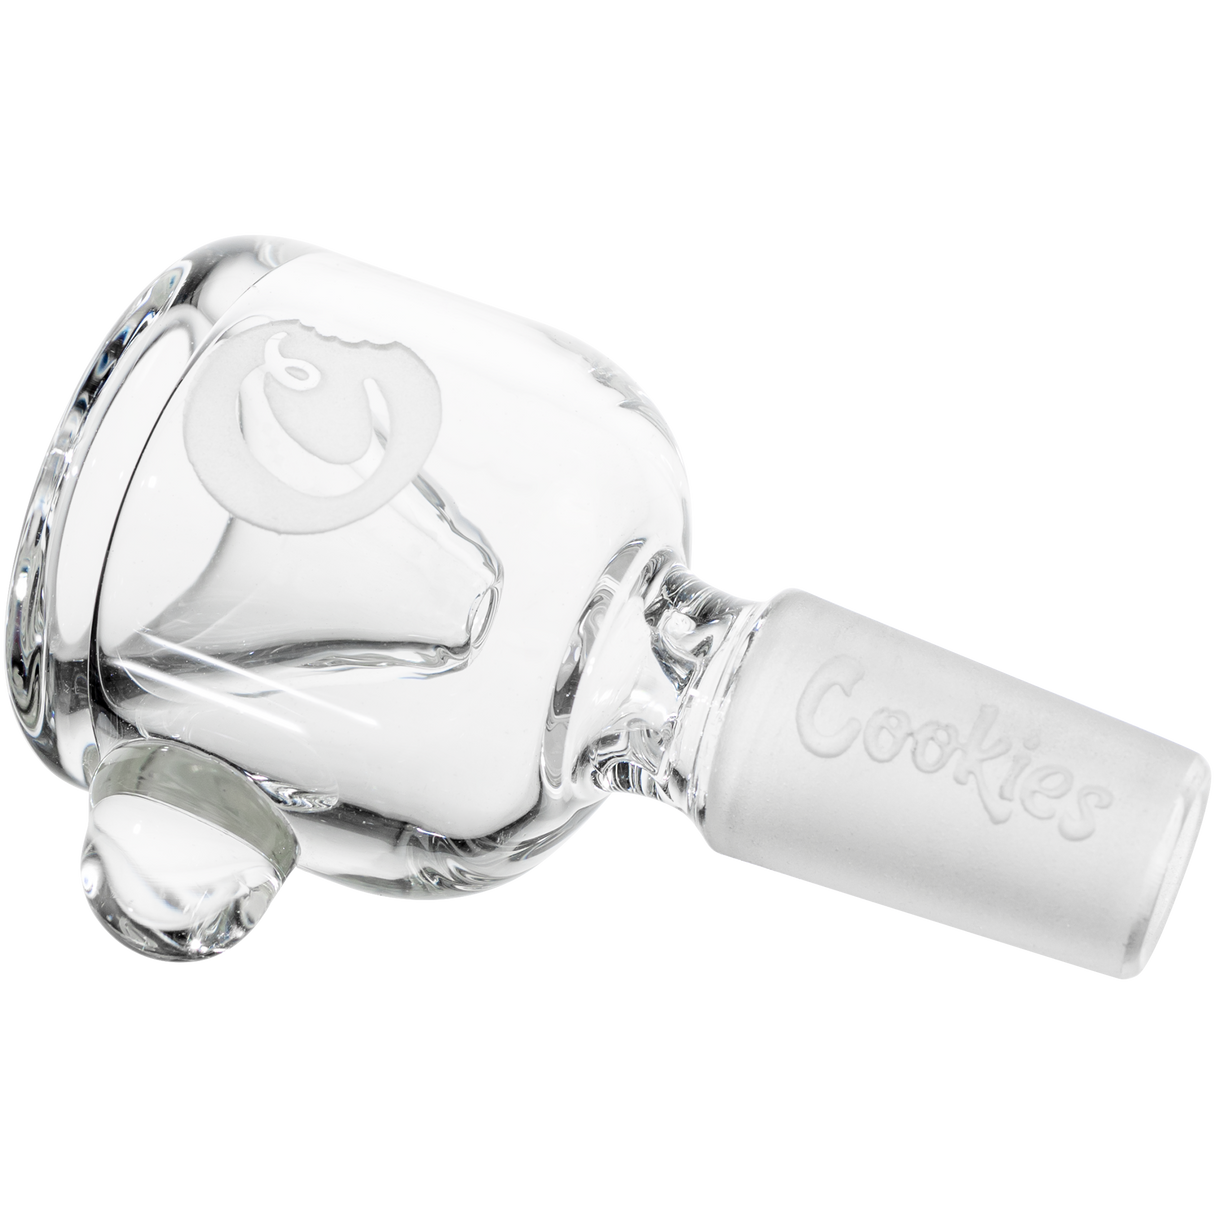 Cookies Classic Bong Bowl in clear borosilicate glass, 14mm joint size, side view on white background